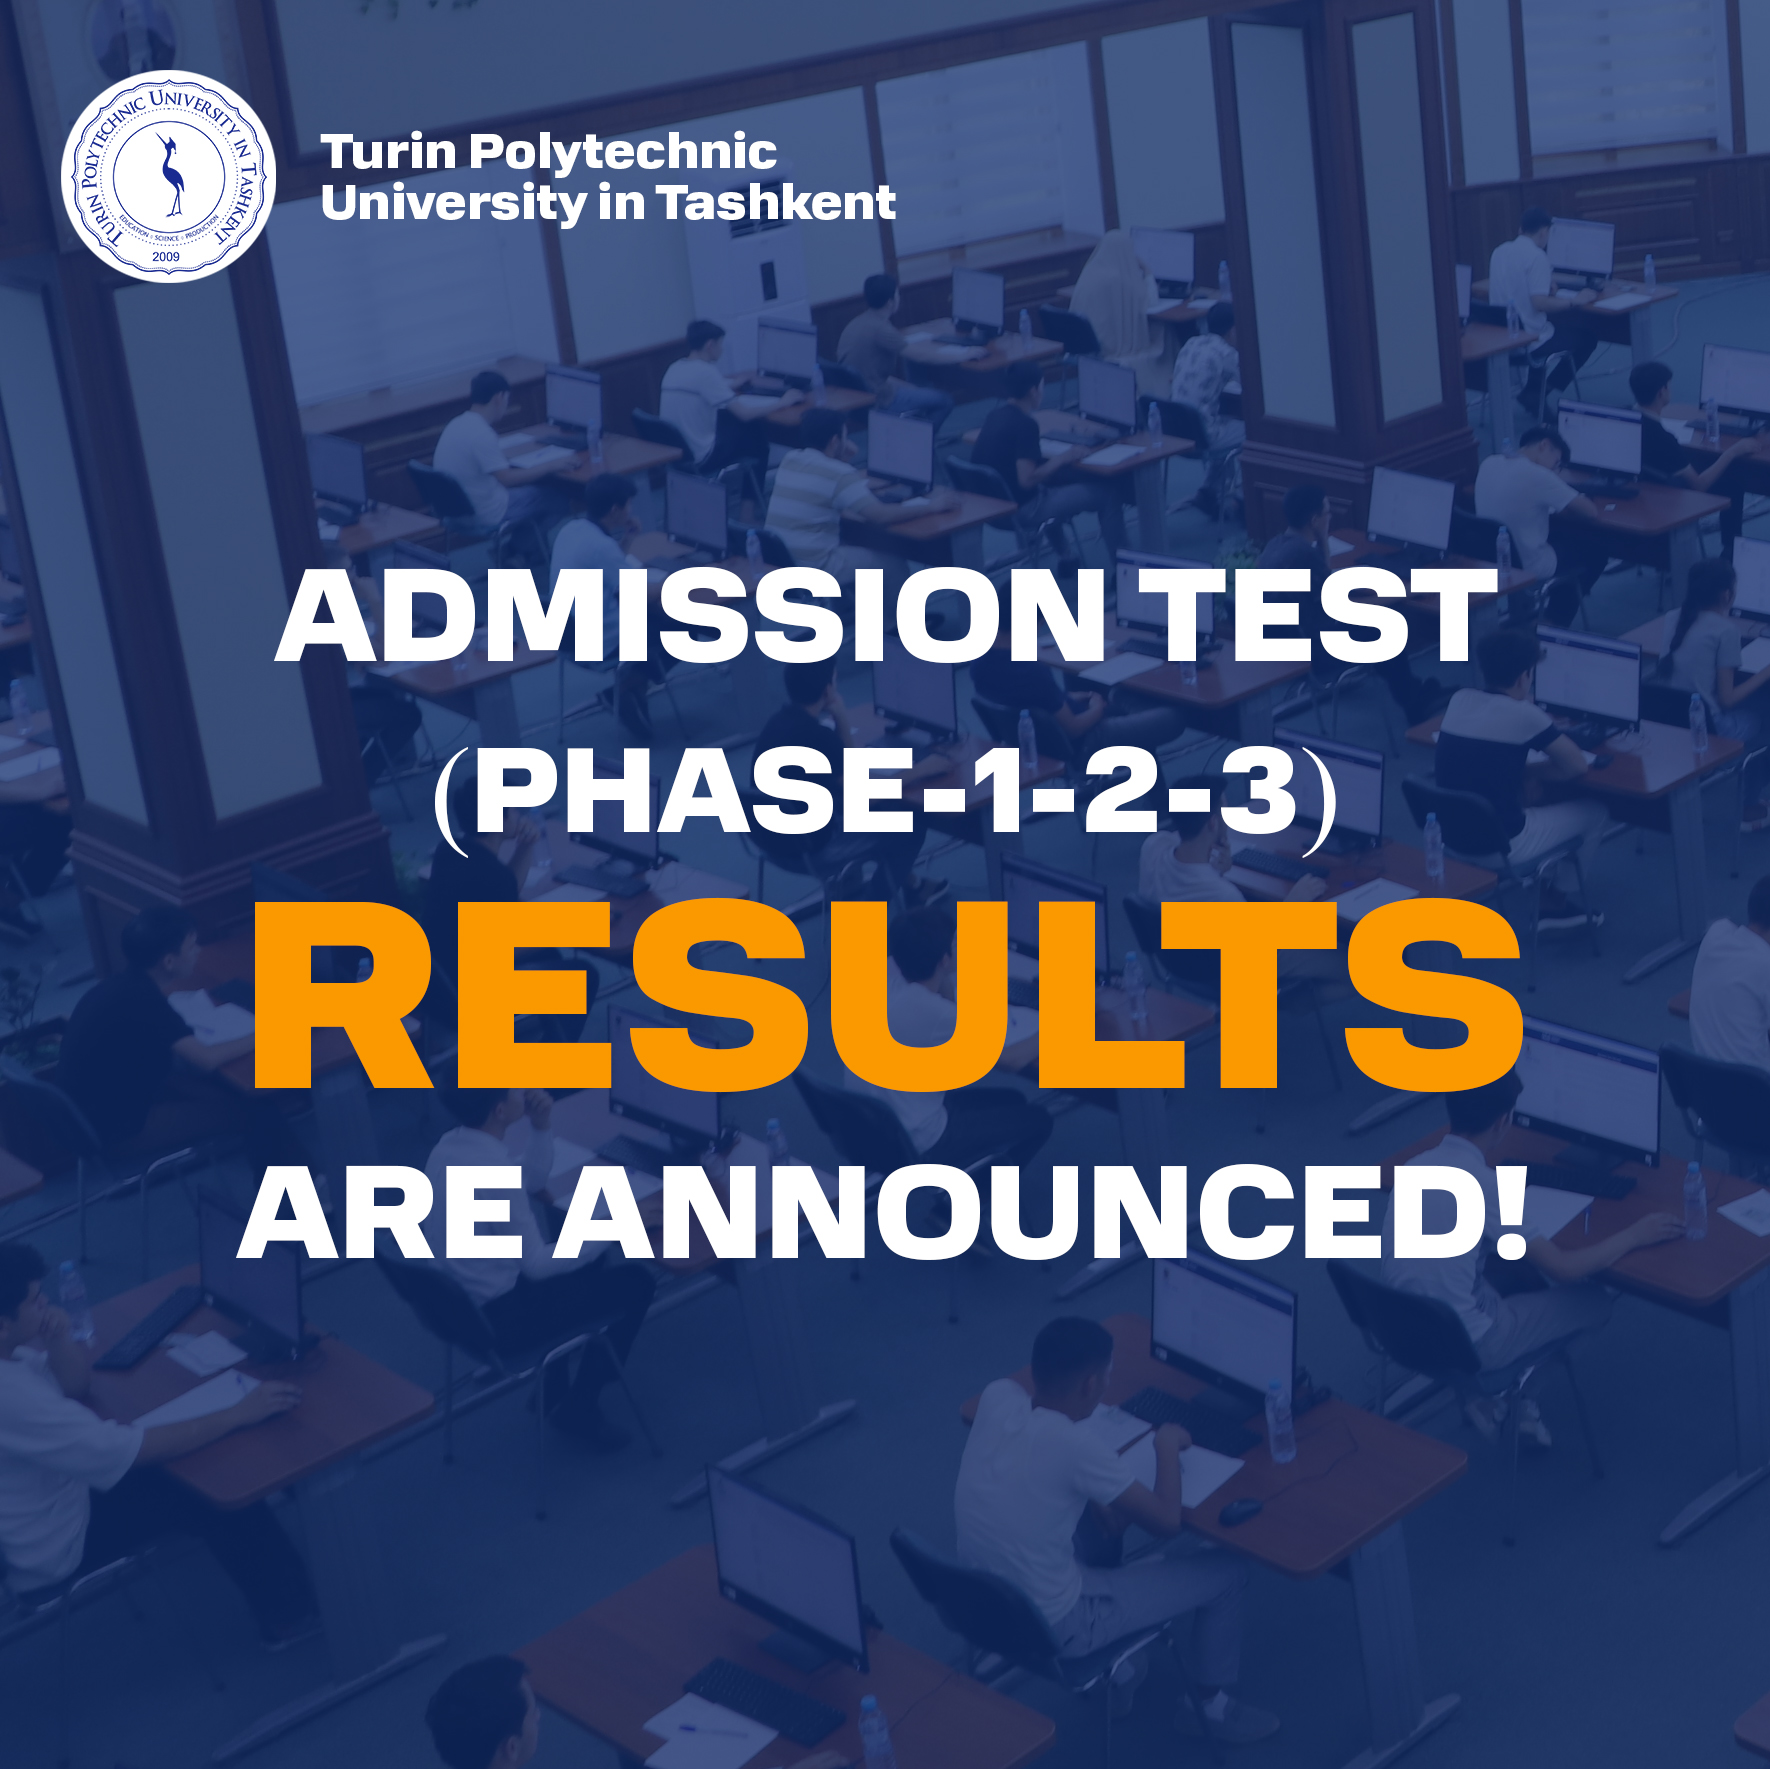 You are currently viewing Admission Test (Phase-1-2-3) Results are announced!